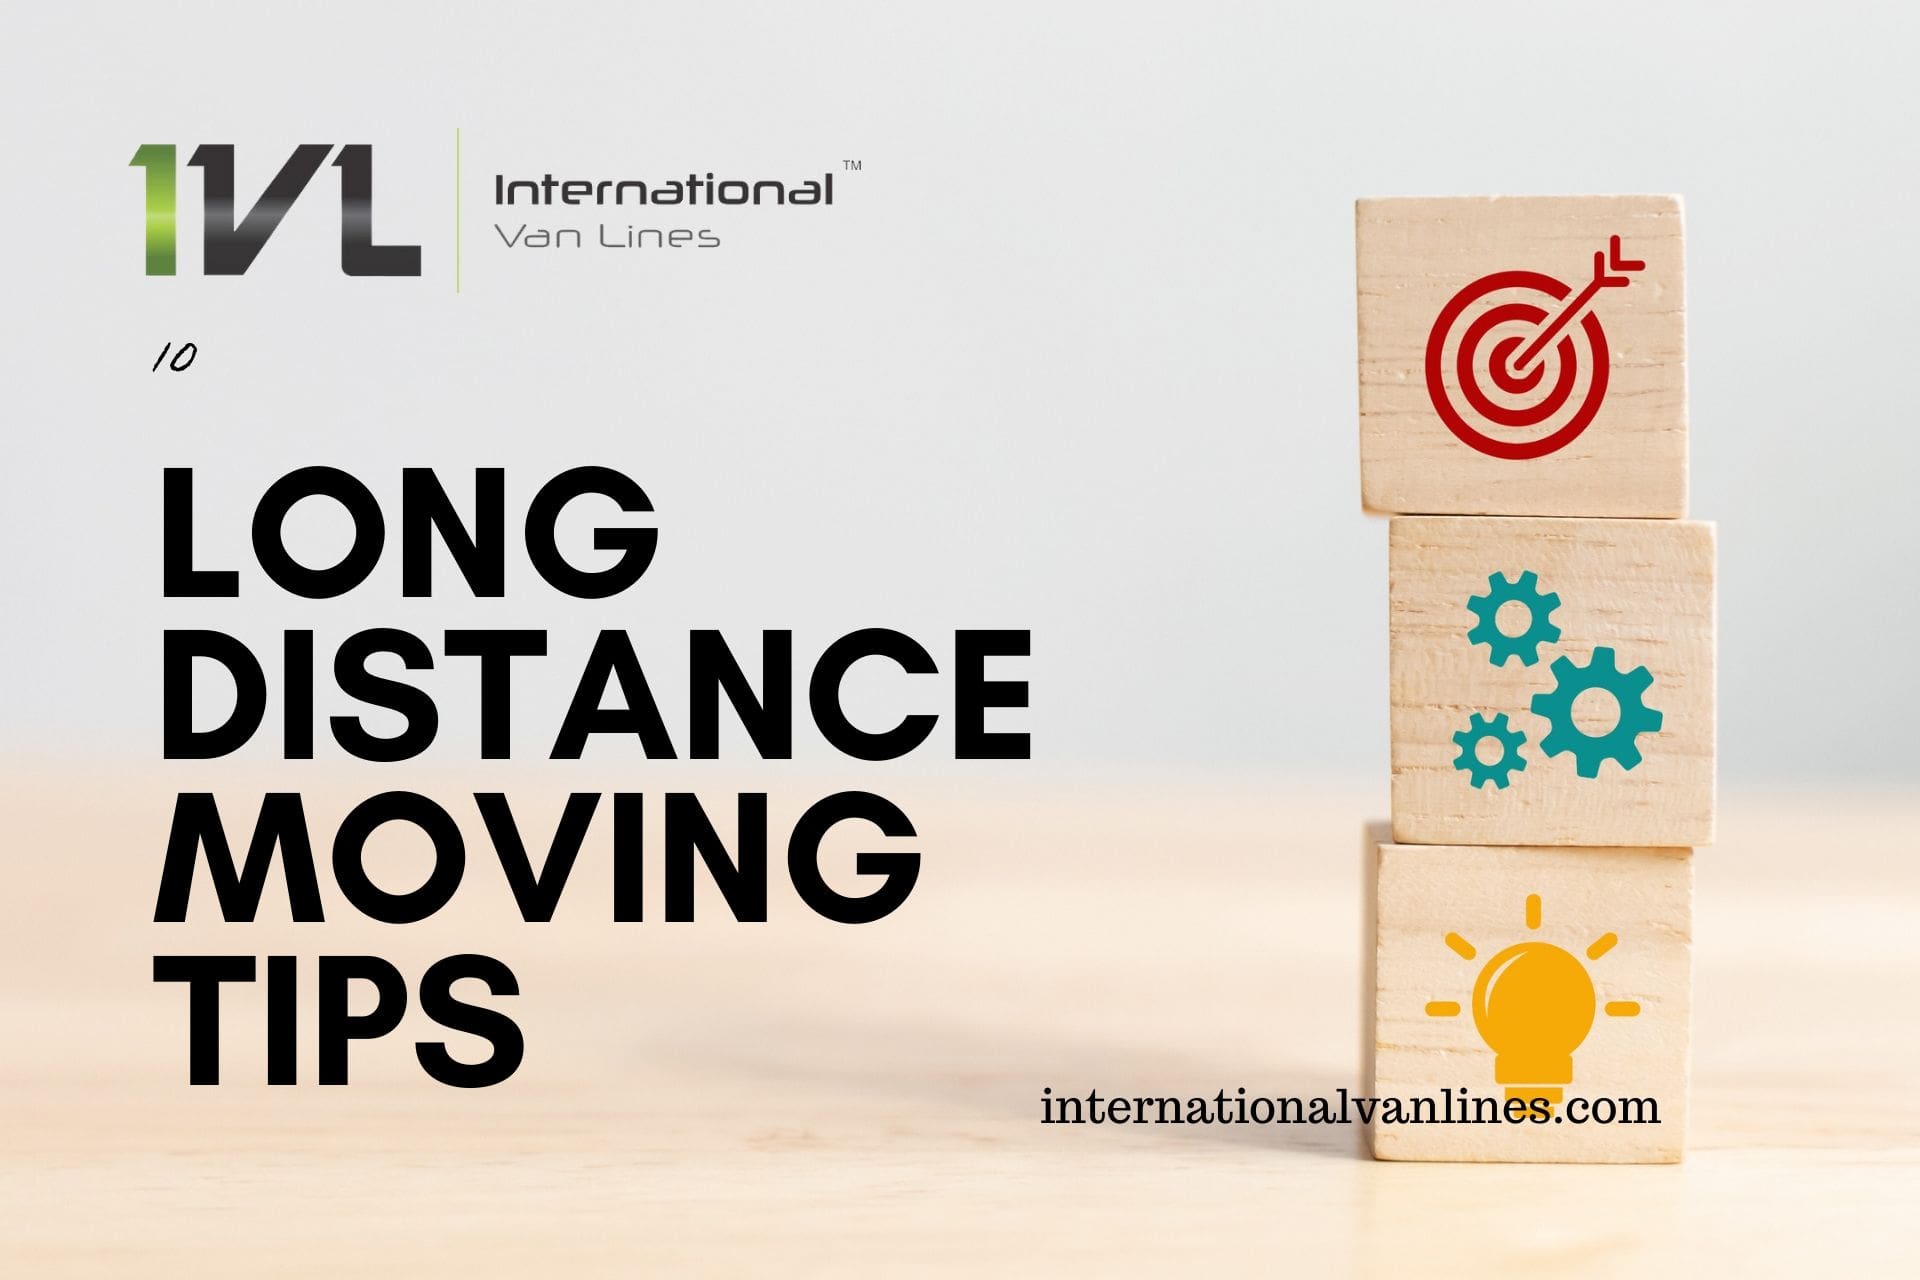 10 long distance moving tips